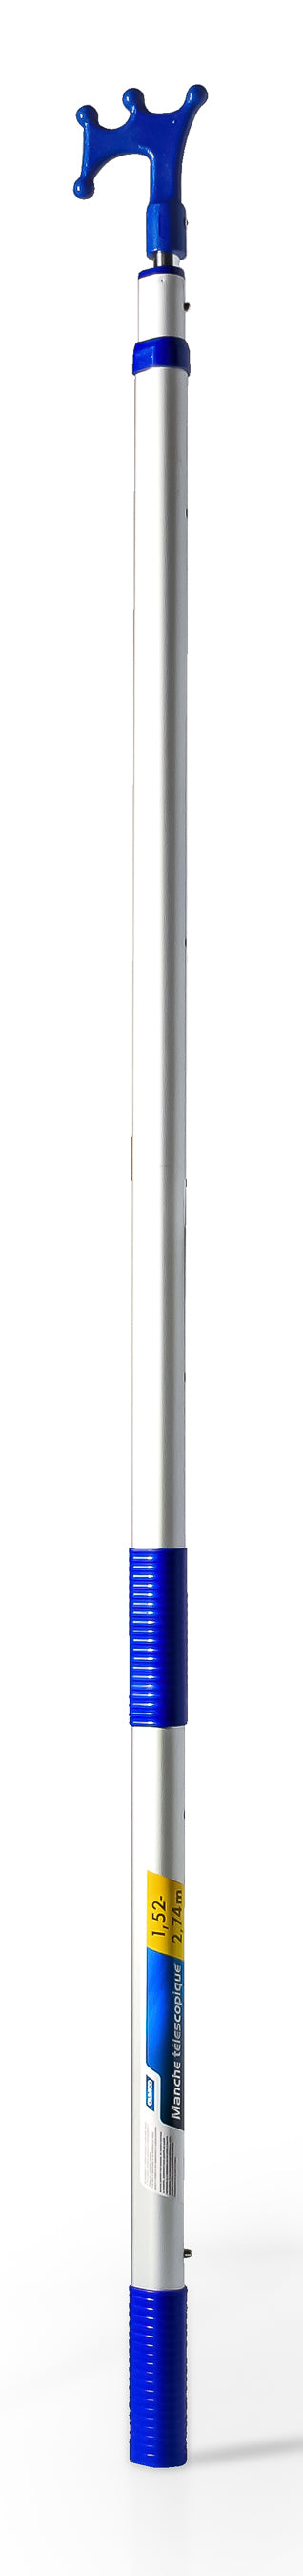 Camco Telescoping handle with Boat Hook - 5' to 9'